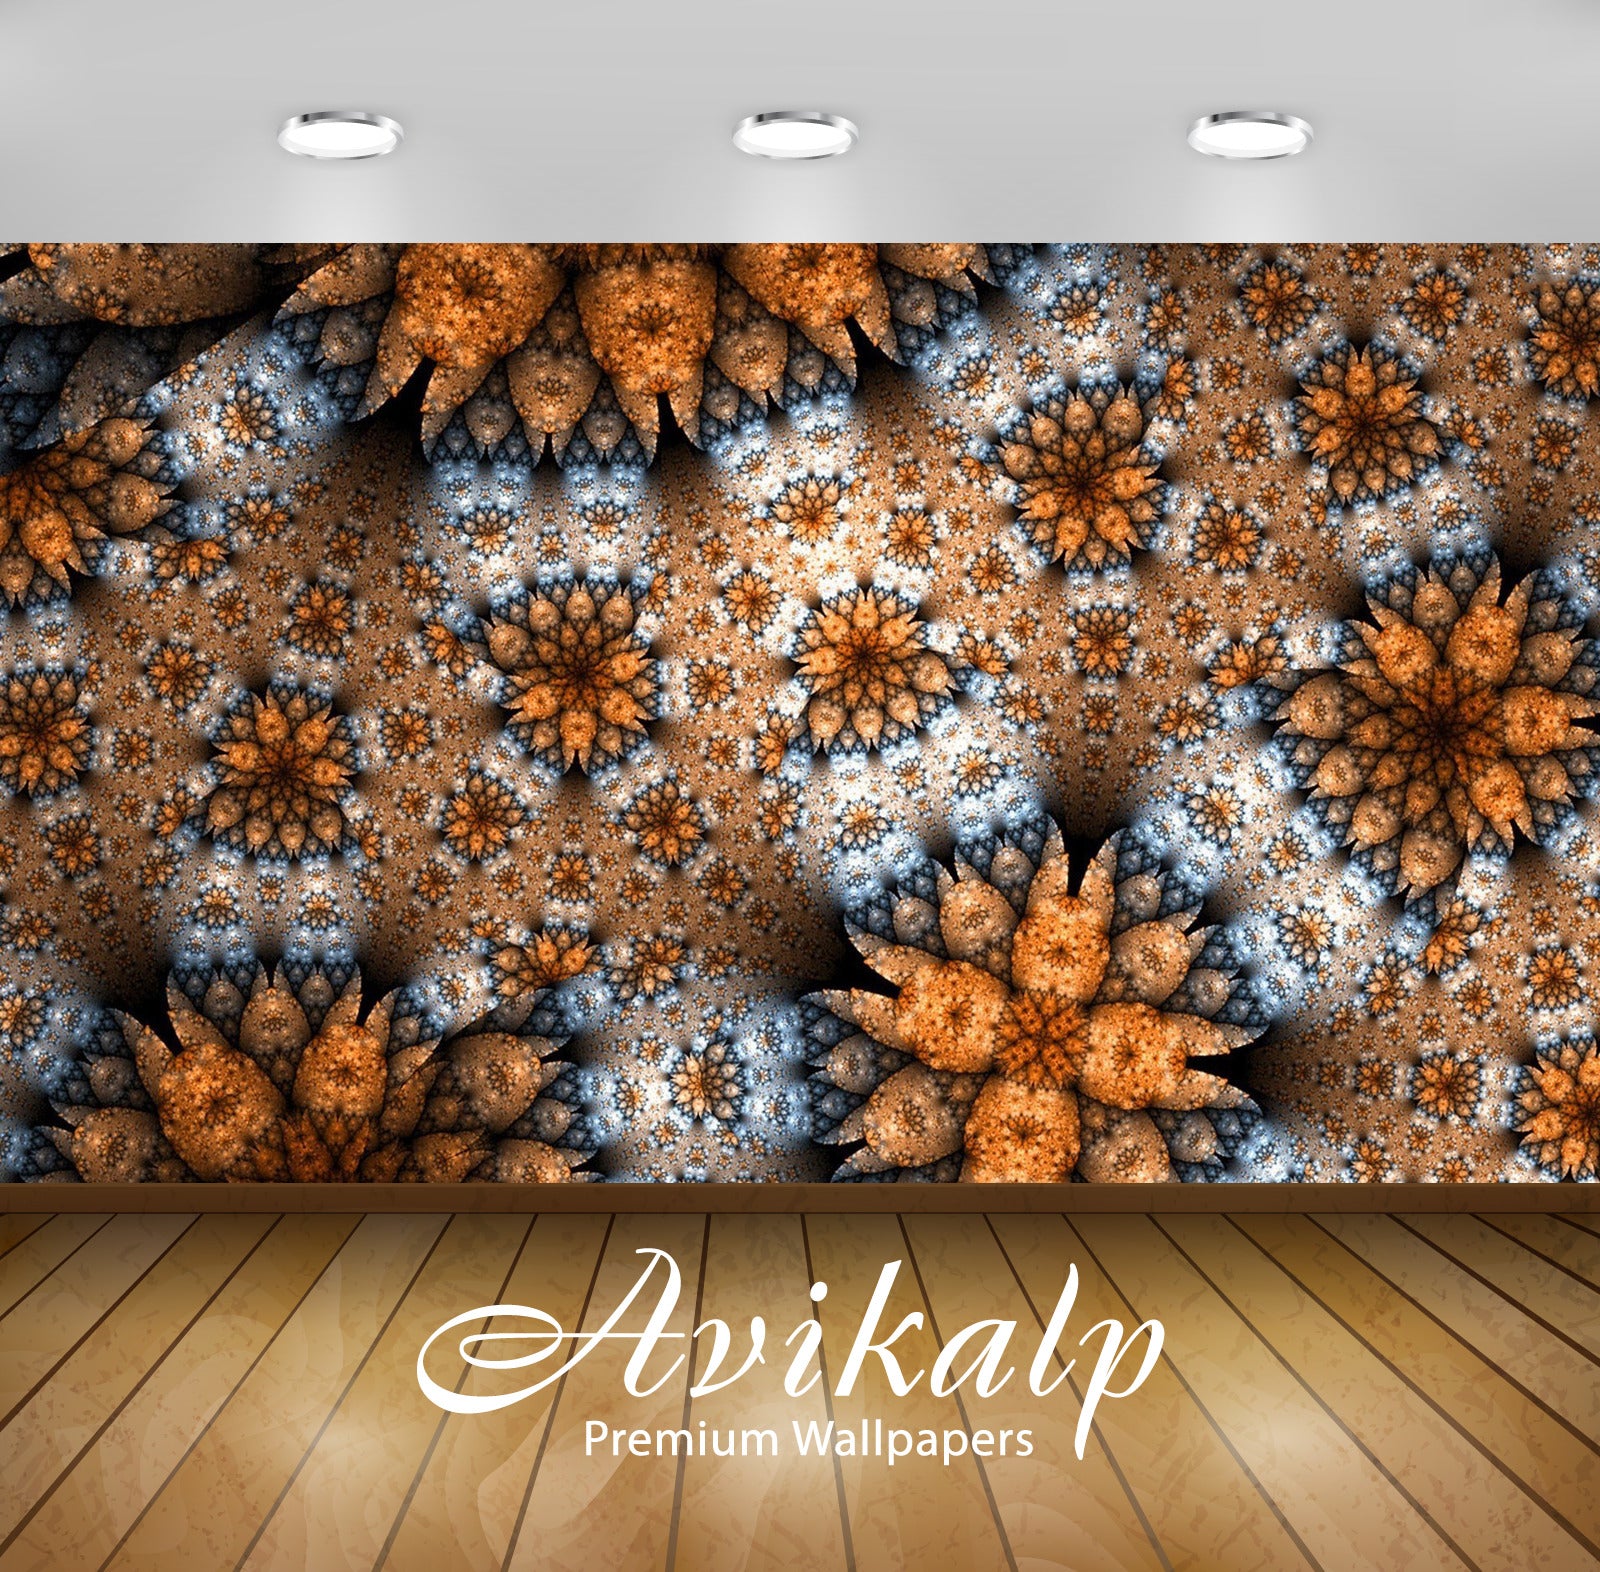 Avikalp Exclusive Awi4607 Rusty Flowers Full HD Wallpapers for Living room, Hall, Kids Room, Kitchen